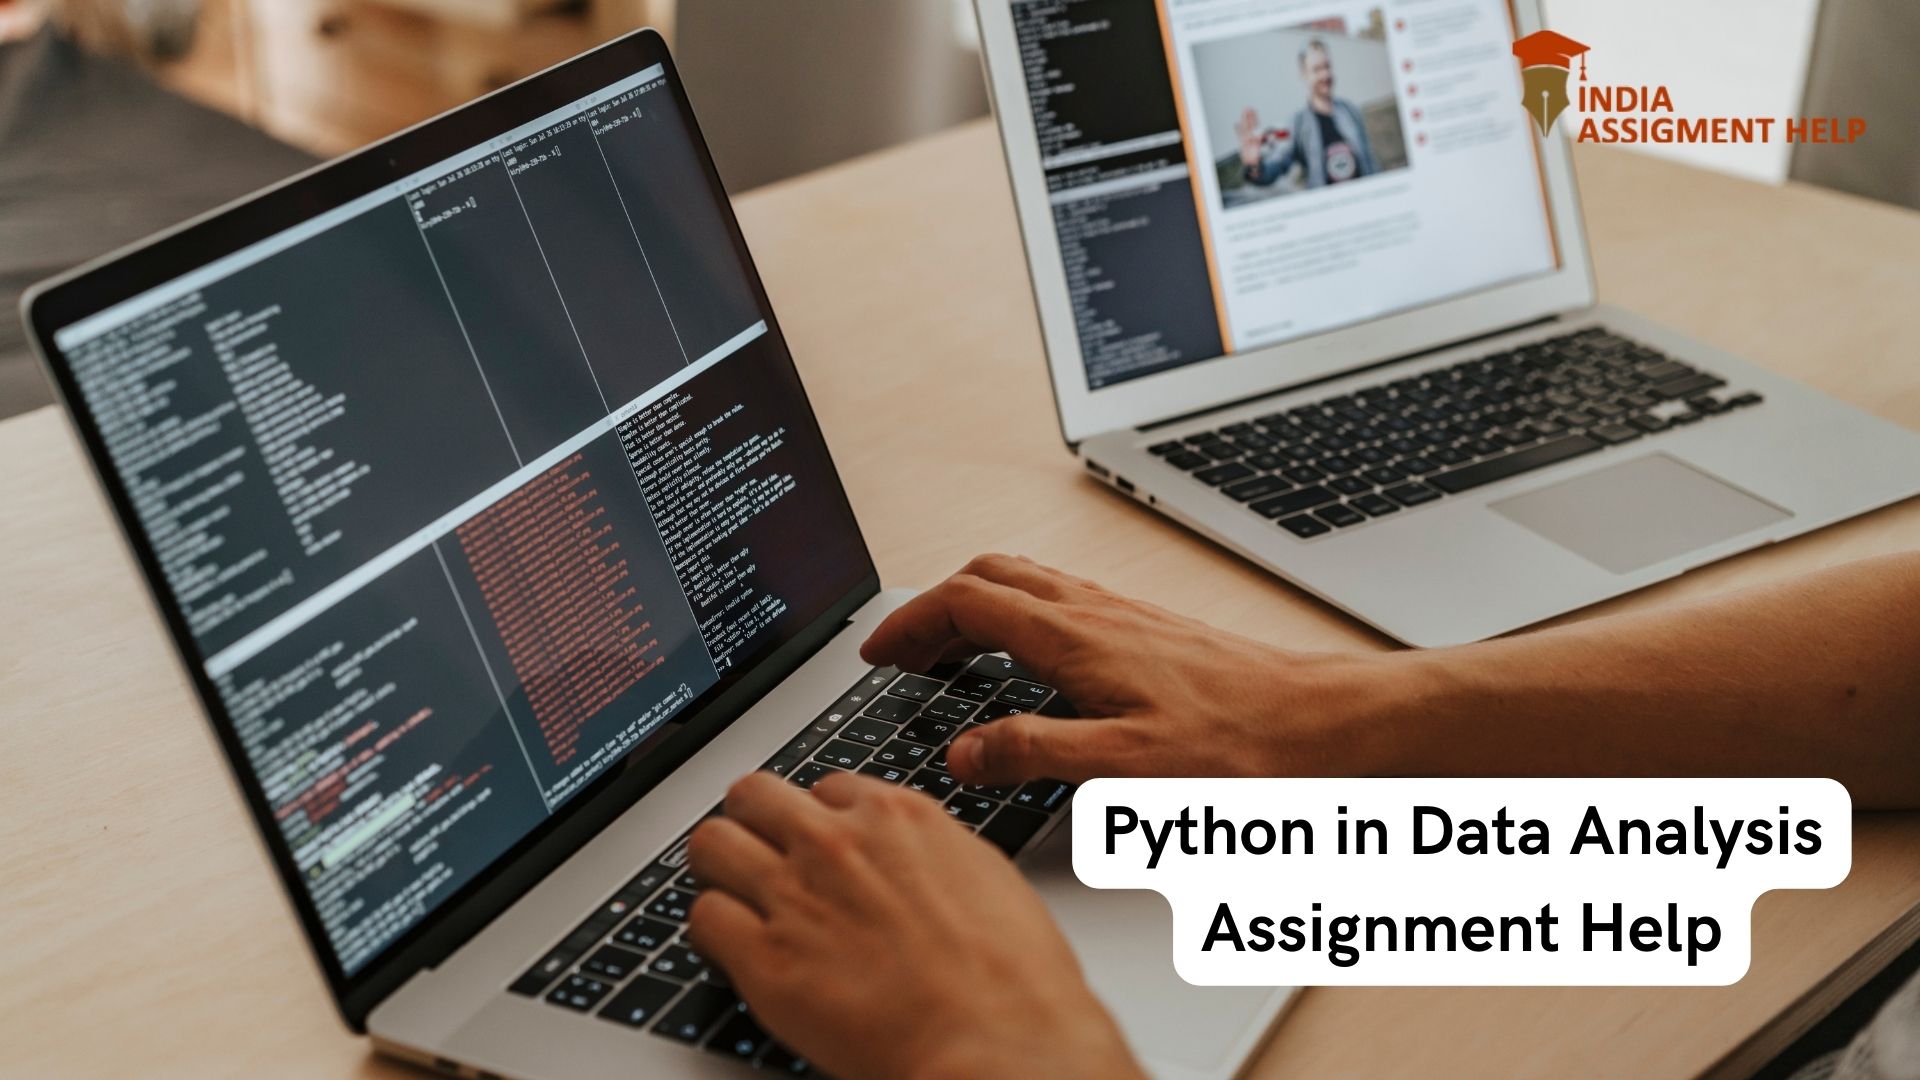 Get Away With the Difficulties by Availing Top-Notch Python in Data Analysis Assignment Help